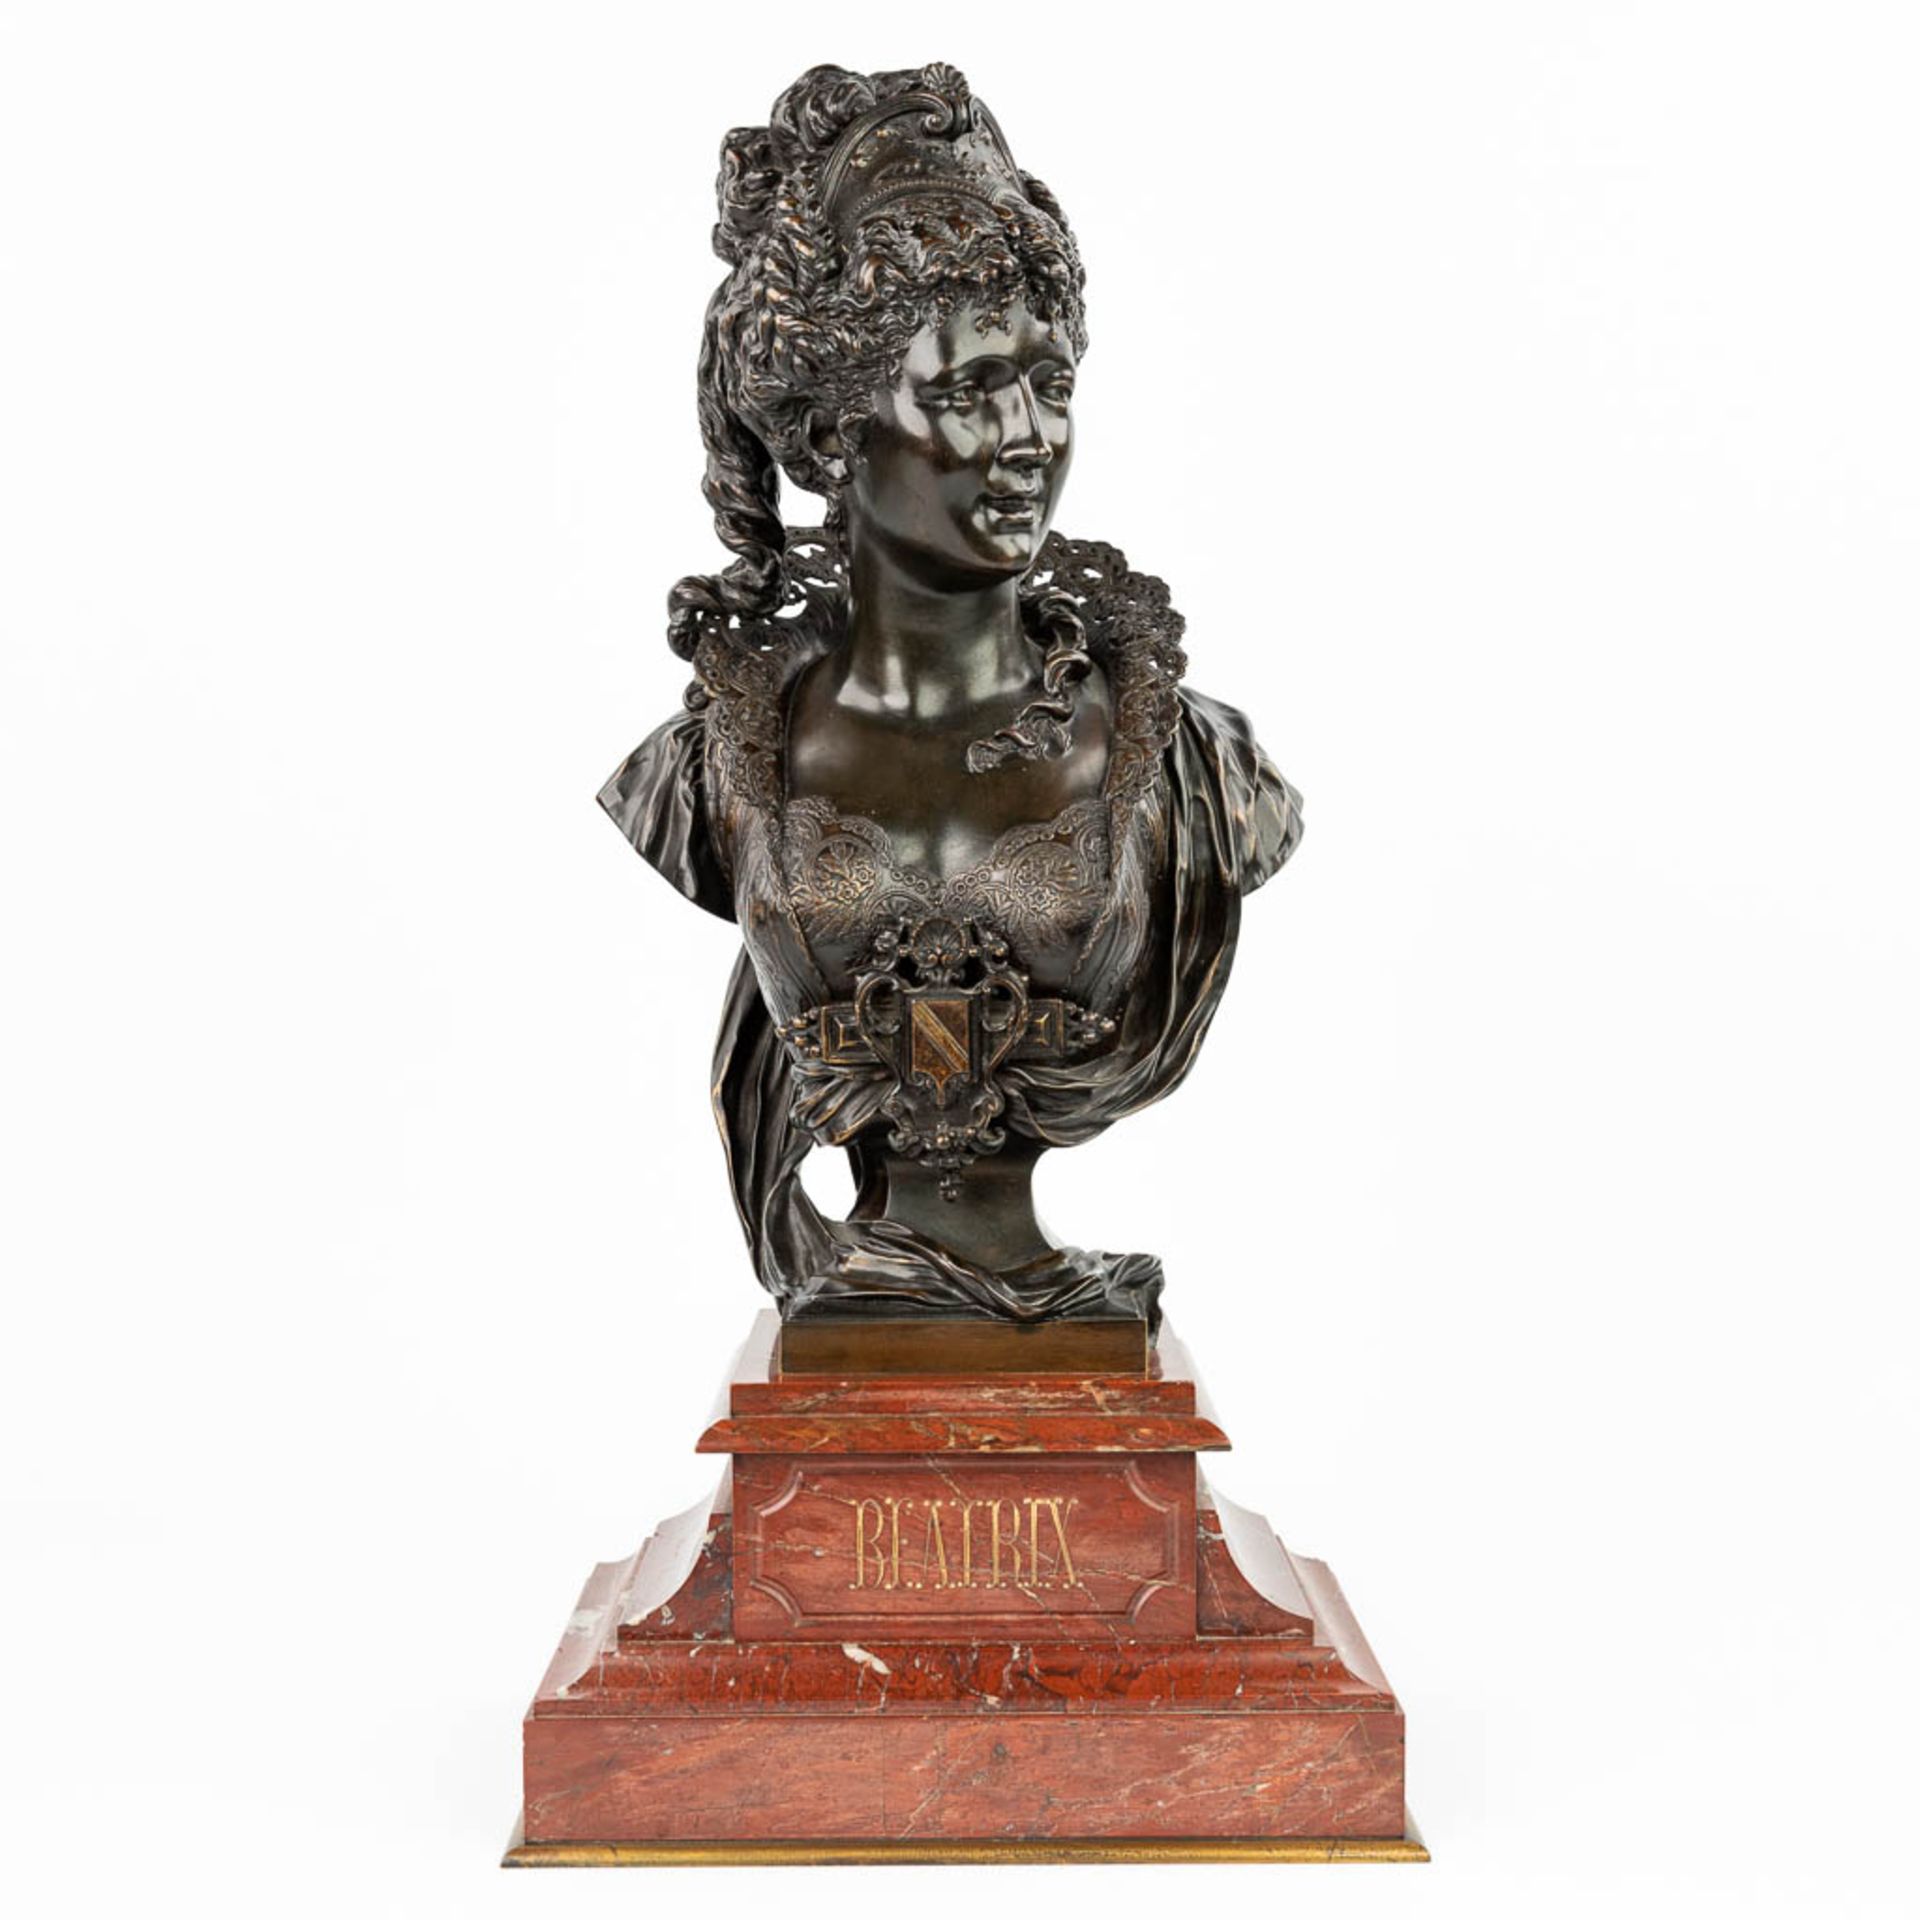 Paul DUBOIS (1829-1905) 'Beatrix' a bronze bust, mounted on a red marble base. (H:59cm) - Image 4 of 11